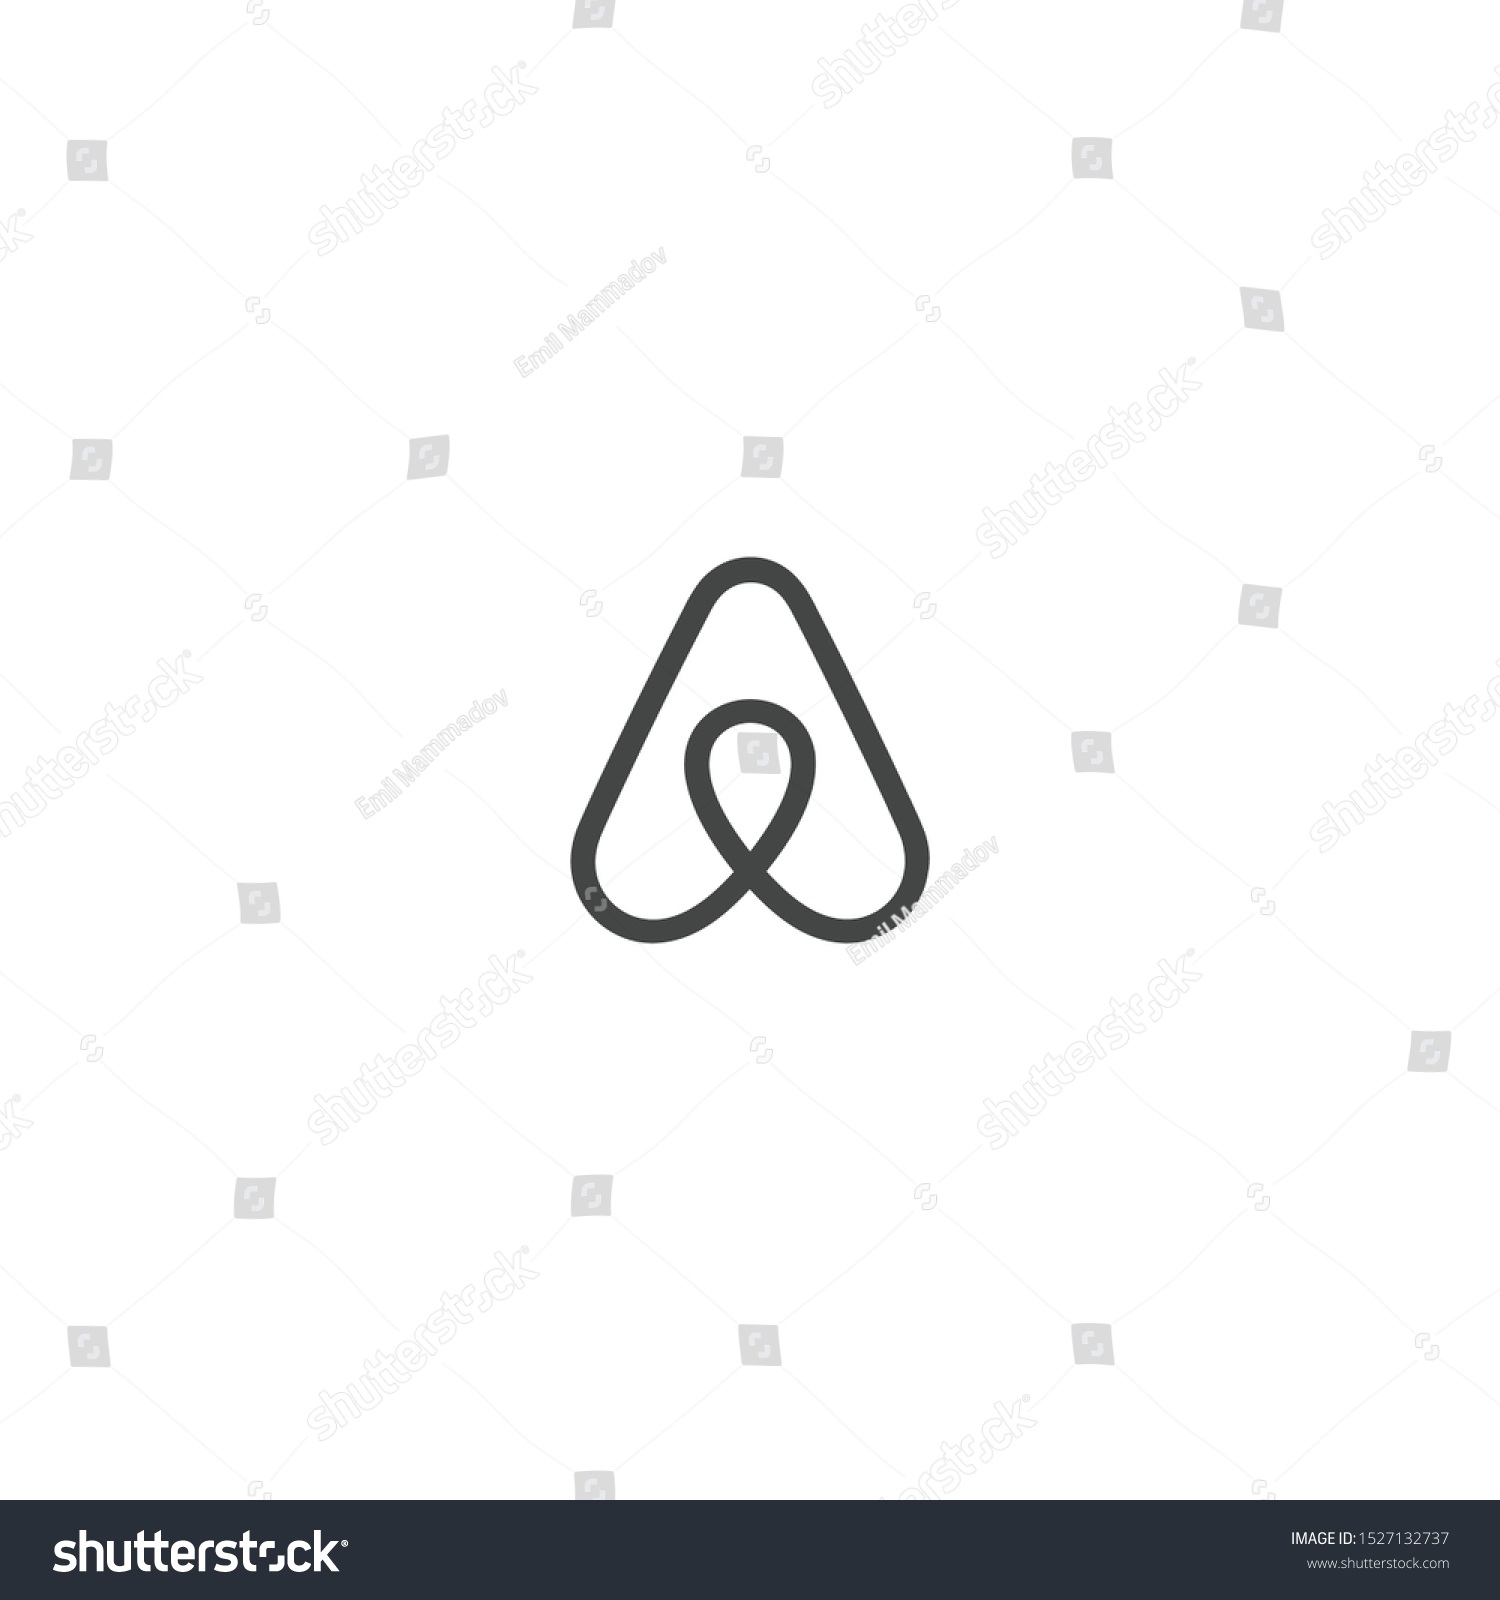 SVG of Airbnb logo design. Airbnb icon isolated on white background. Airbnb original logo. svg